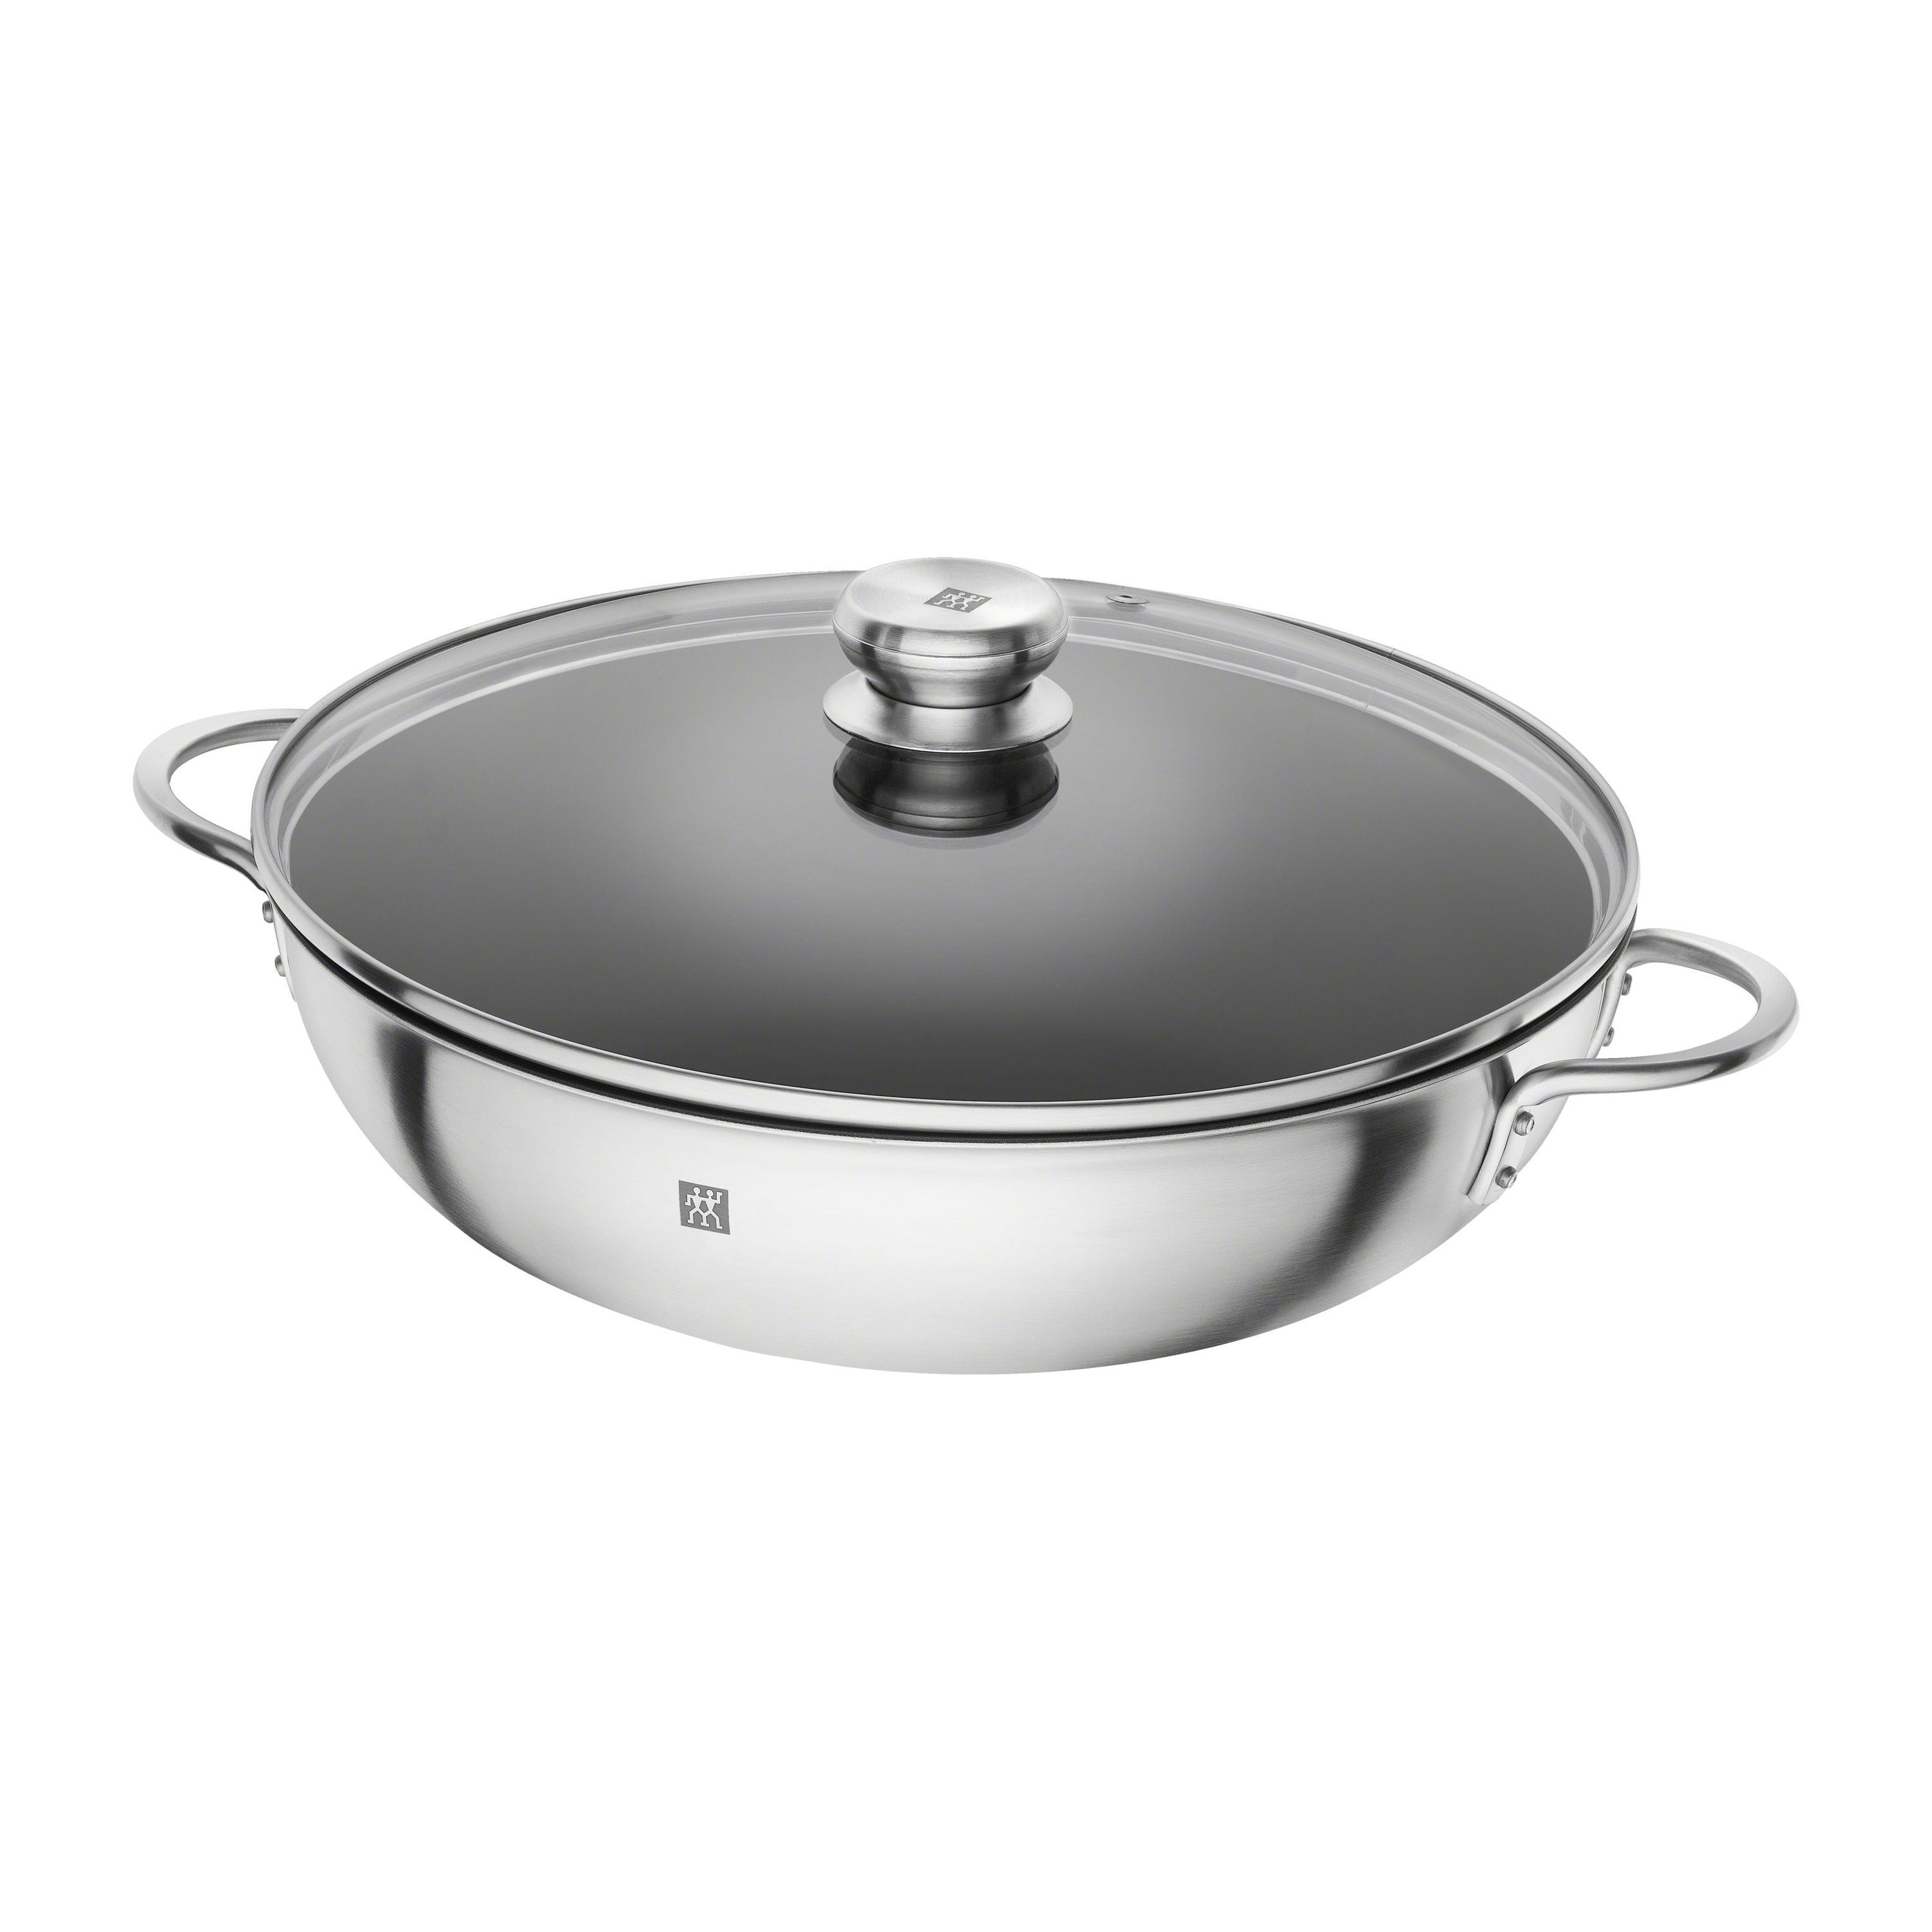 Zwilling 32cm Stainless Steel Frying Pan Twin 18/10 Stainless Steel Induction 